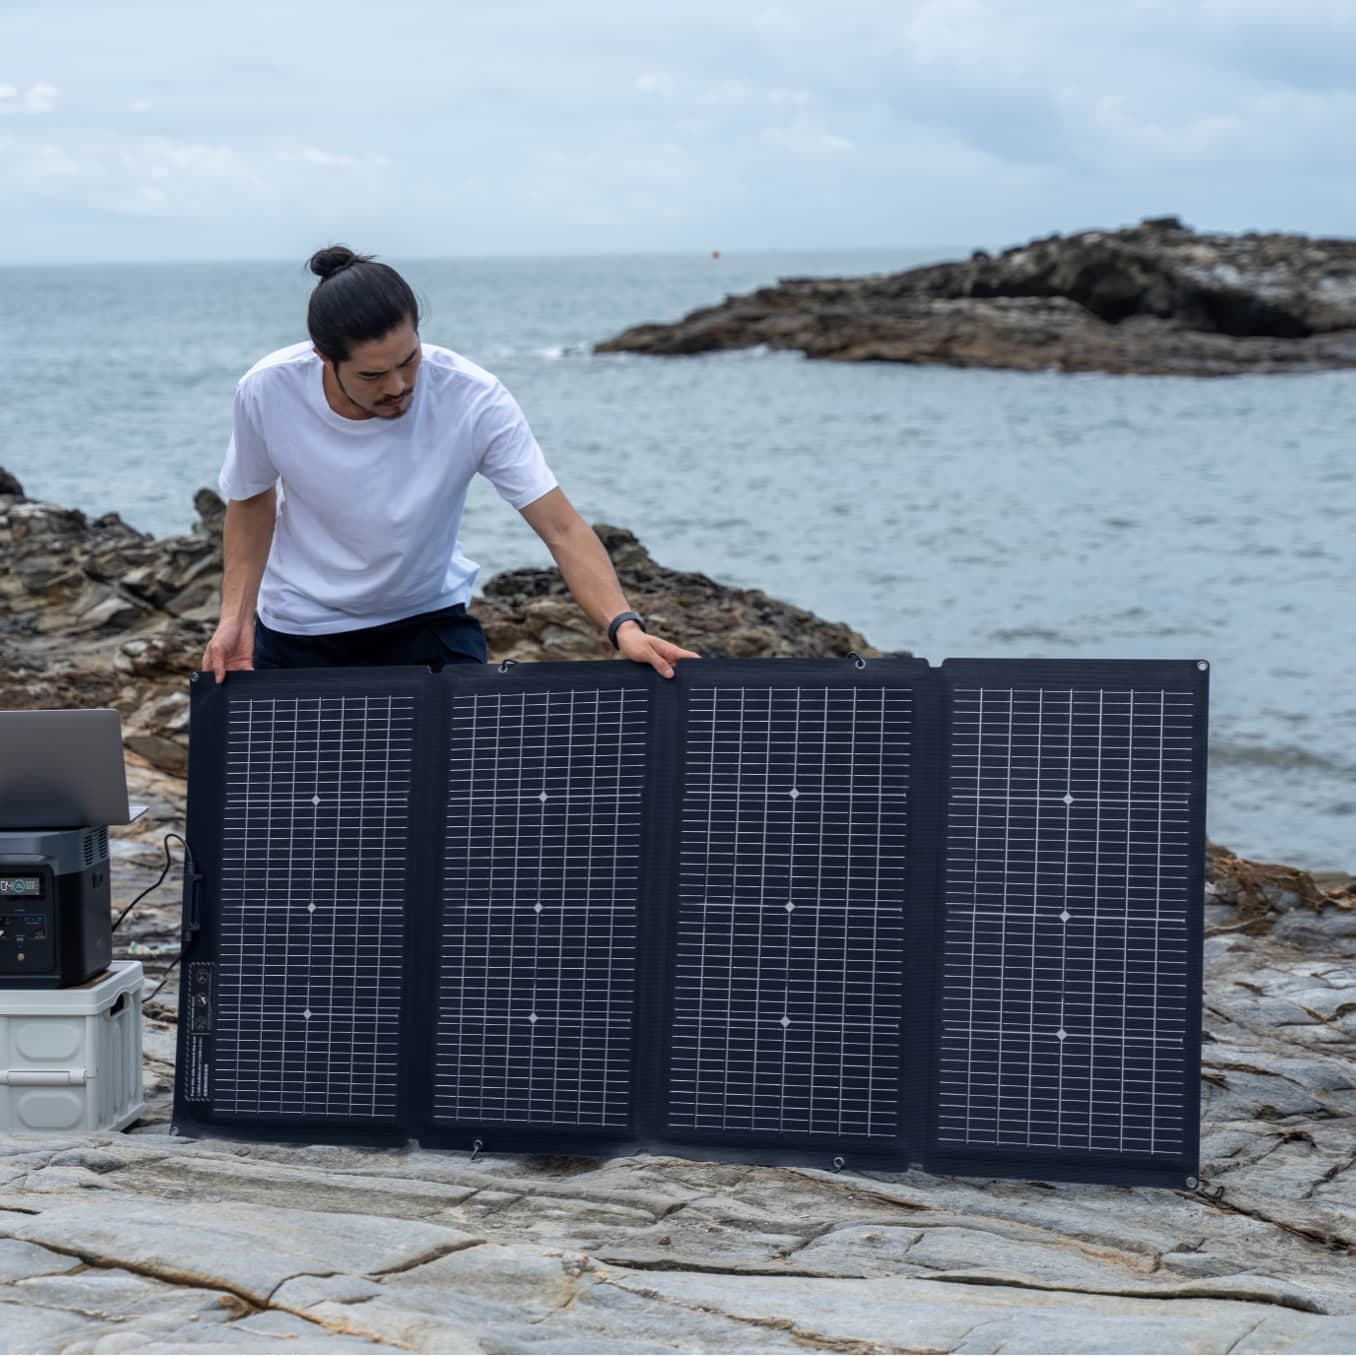 EcoFlow 220W Bifacial Portable Solar Panel - With Adjustable Kickstand, Waterproof & Durable for Off The Grid Living